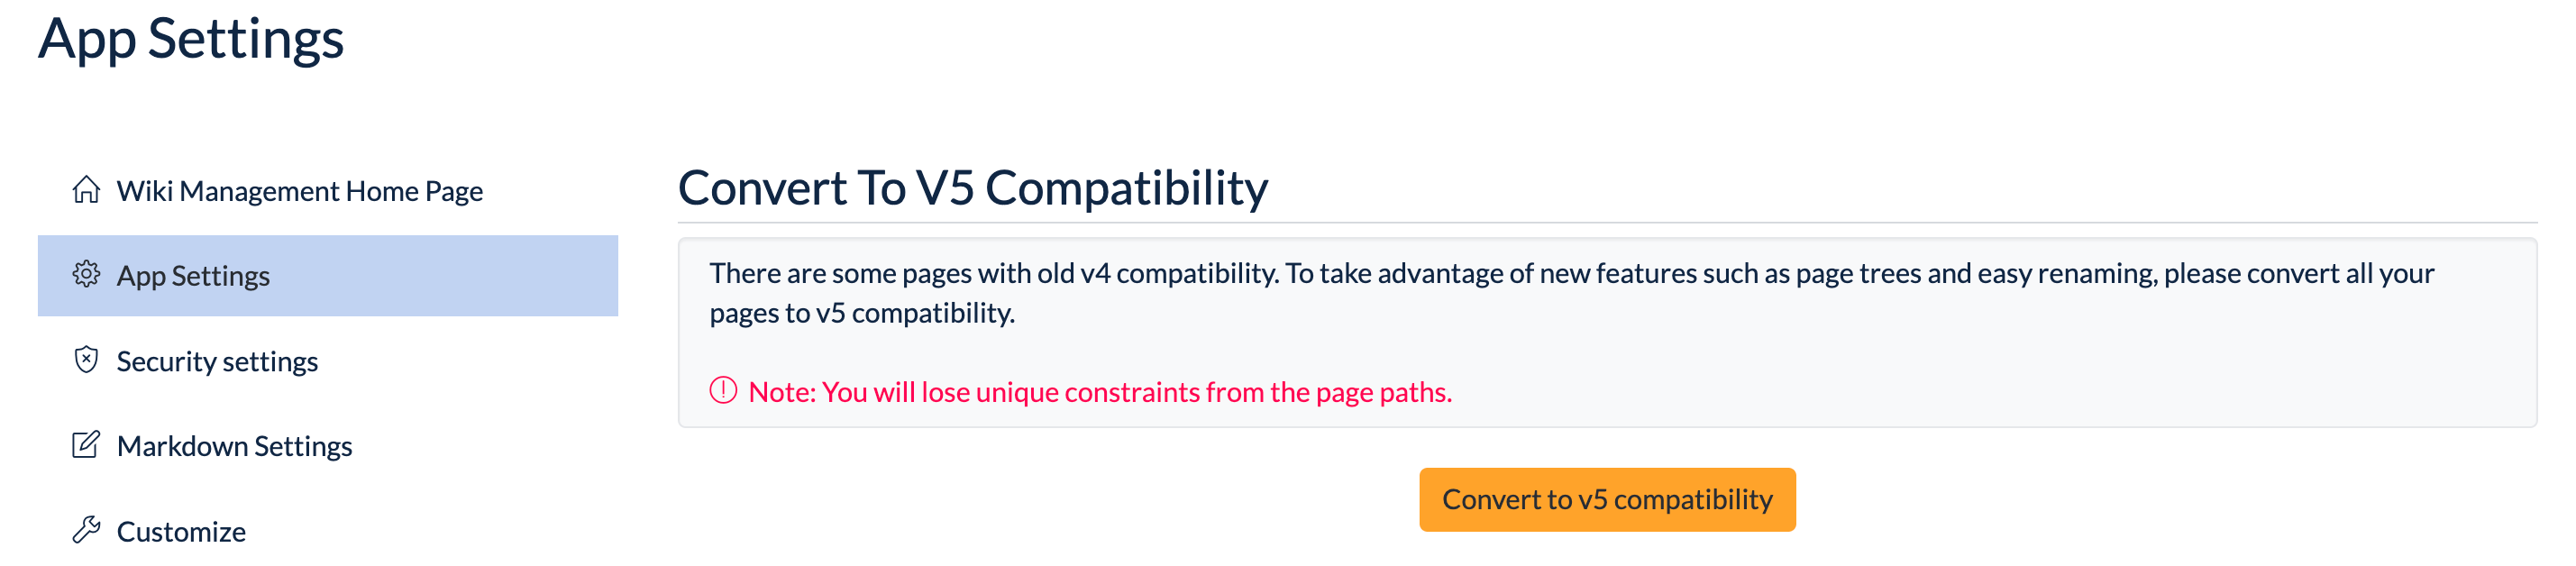 app-settings-convert-to-v5-compatibility